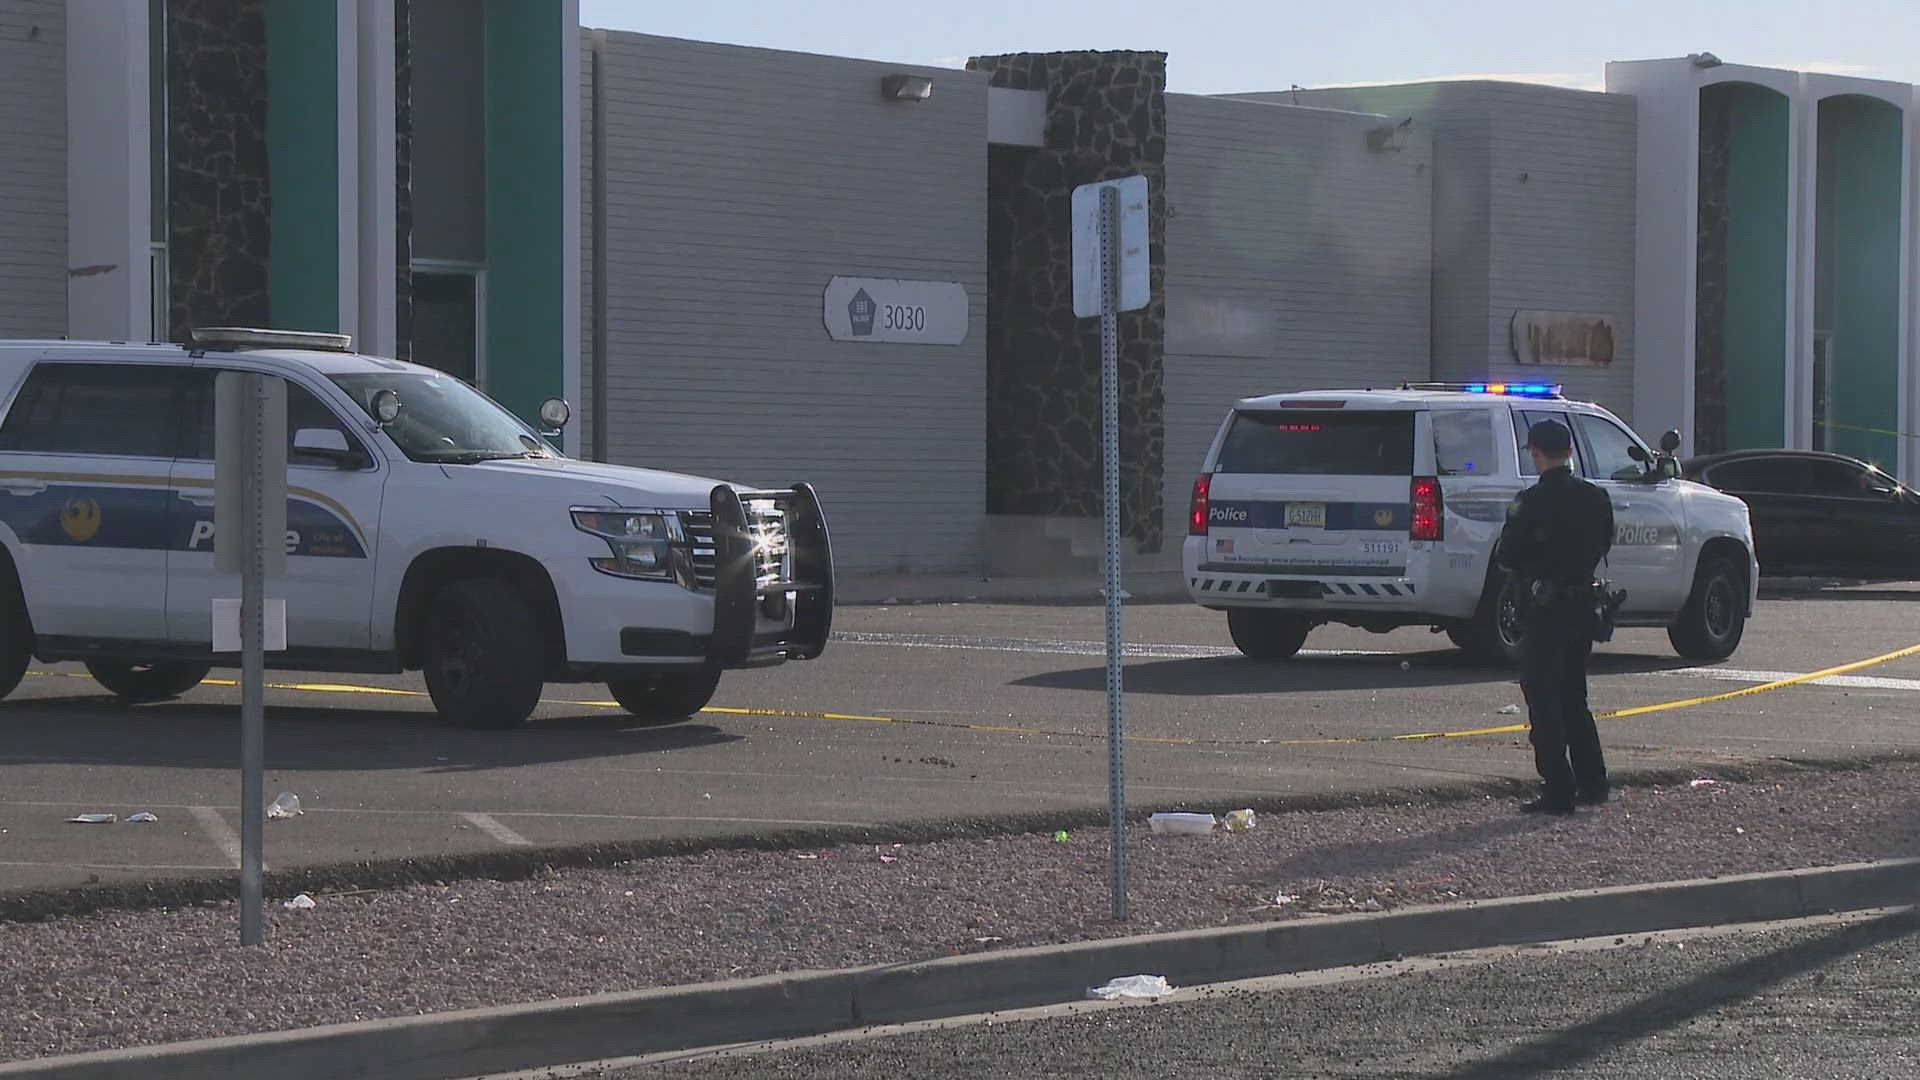 A woman was shot in an area near 30th and Grand avenues in Phoenix on Saturday morning, she later died. Watch the video above for more information.